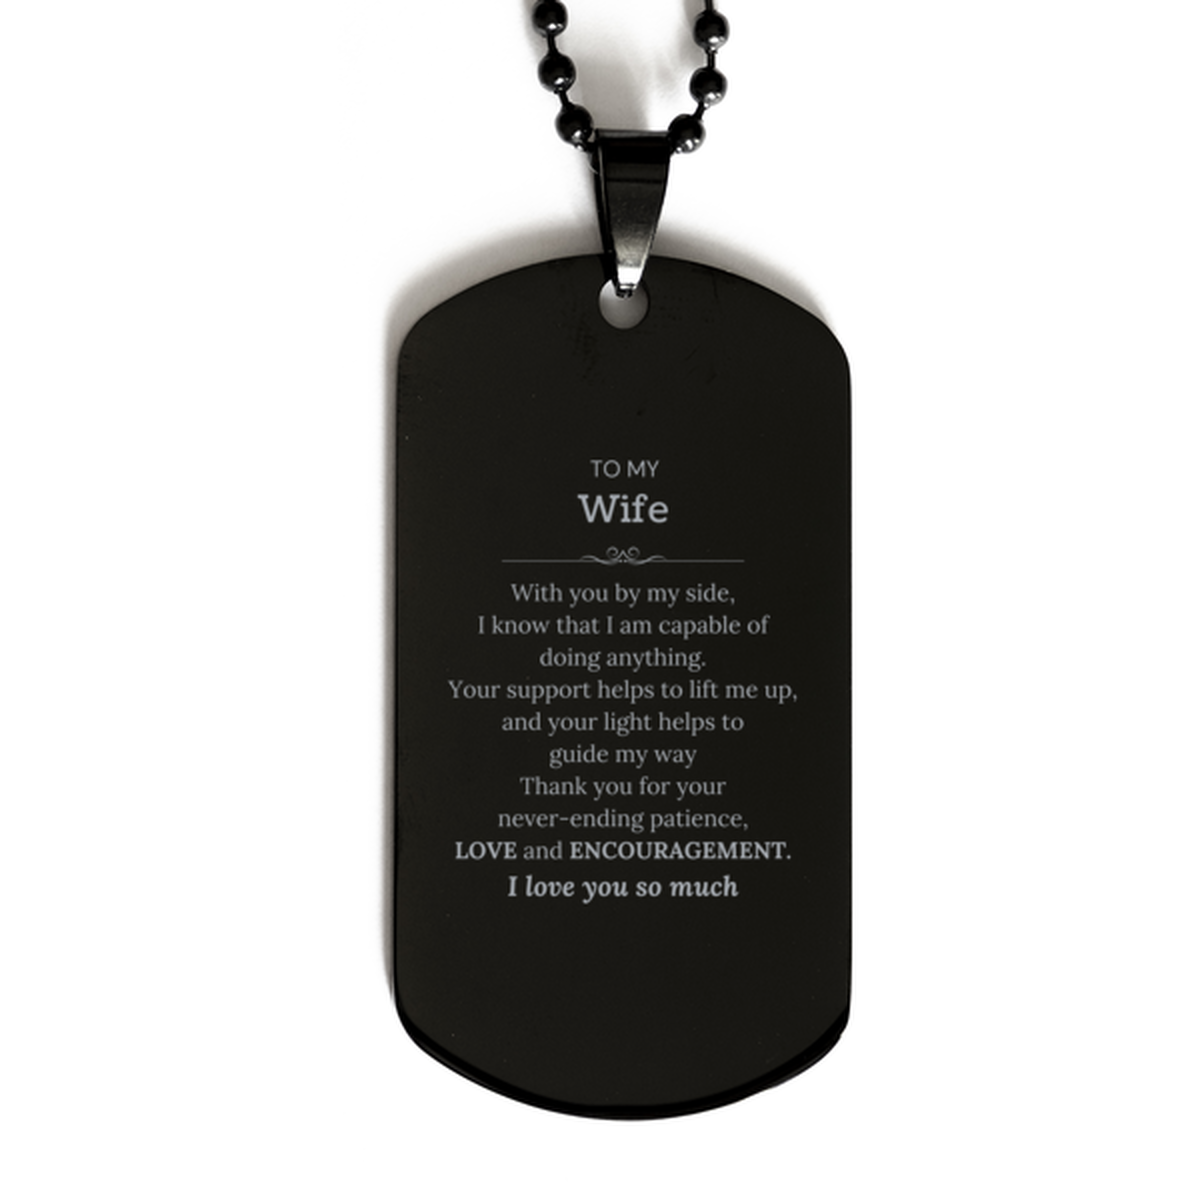 Appreciation Wife Black Dog Tag Gifts, To My Wife Birthday Christmas Wedding Keepsake Gifts for Wife With you by my side, I know that I am capable of doing anything. I love you so much